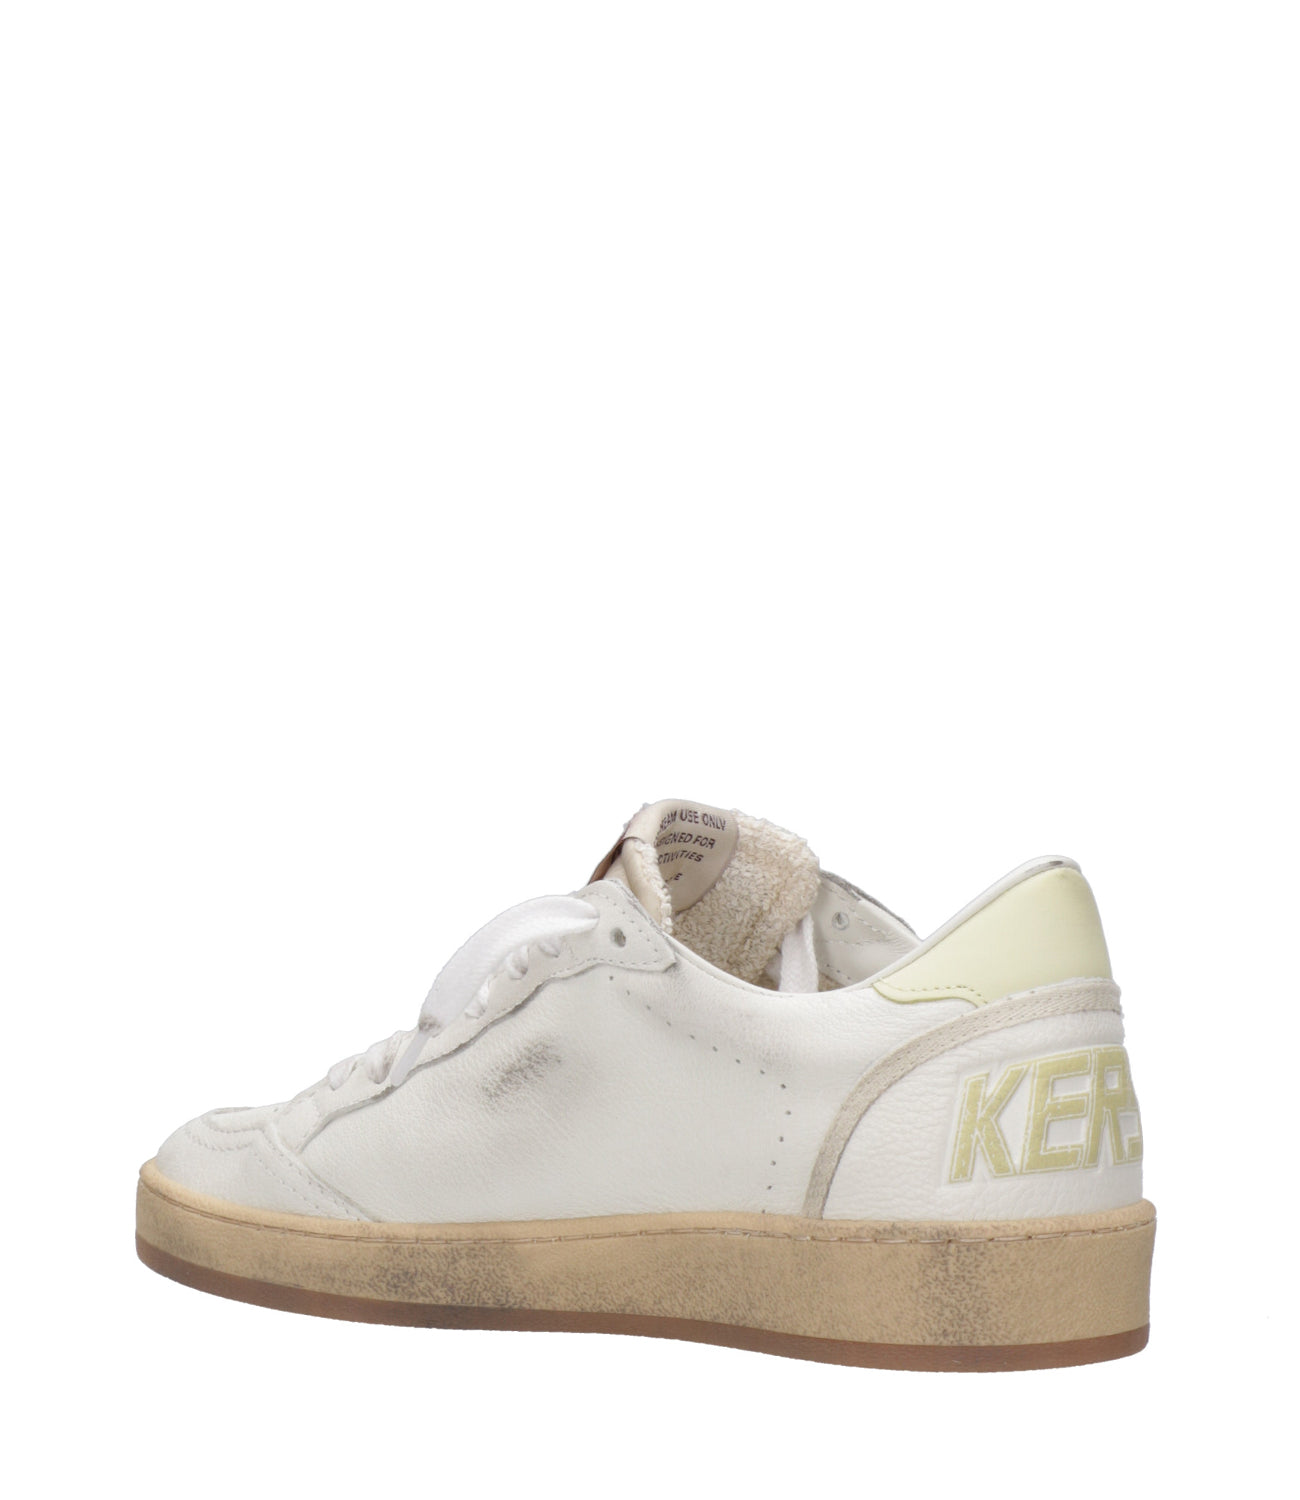 Golden Goose | Ballstar Sneakers White and Yellow